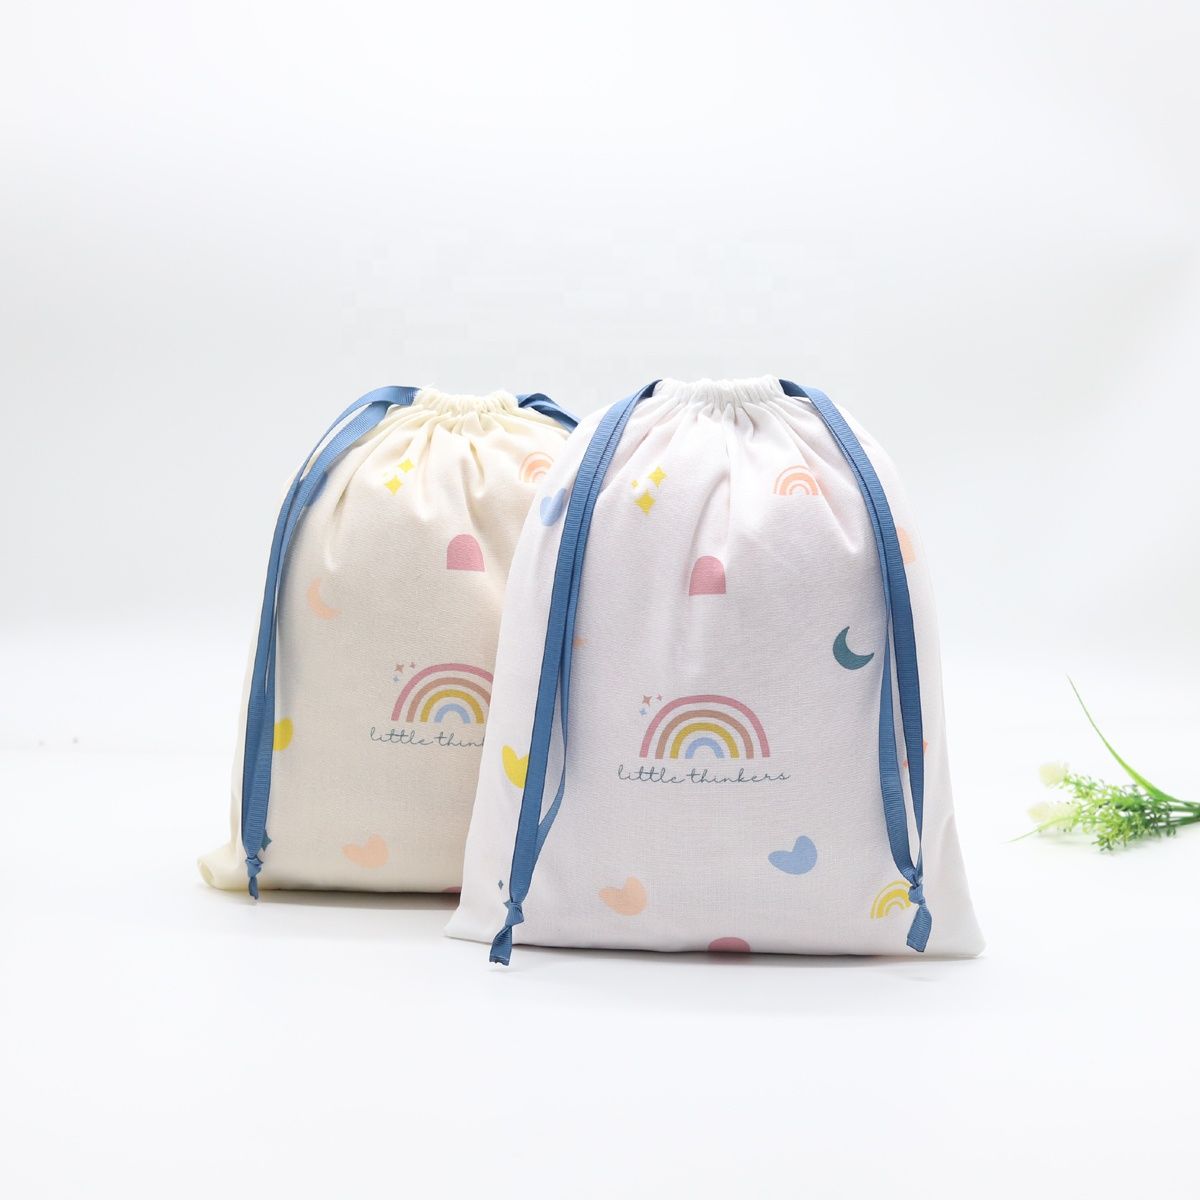 Buy Wholesale Printed Cotton Drawstring Dust Bag for Shoe